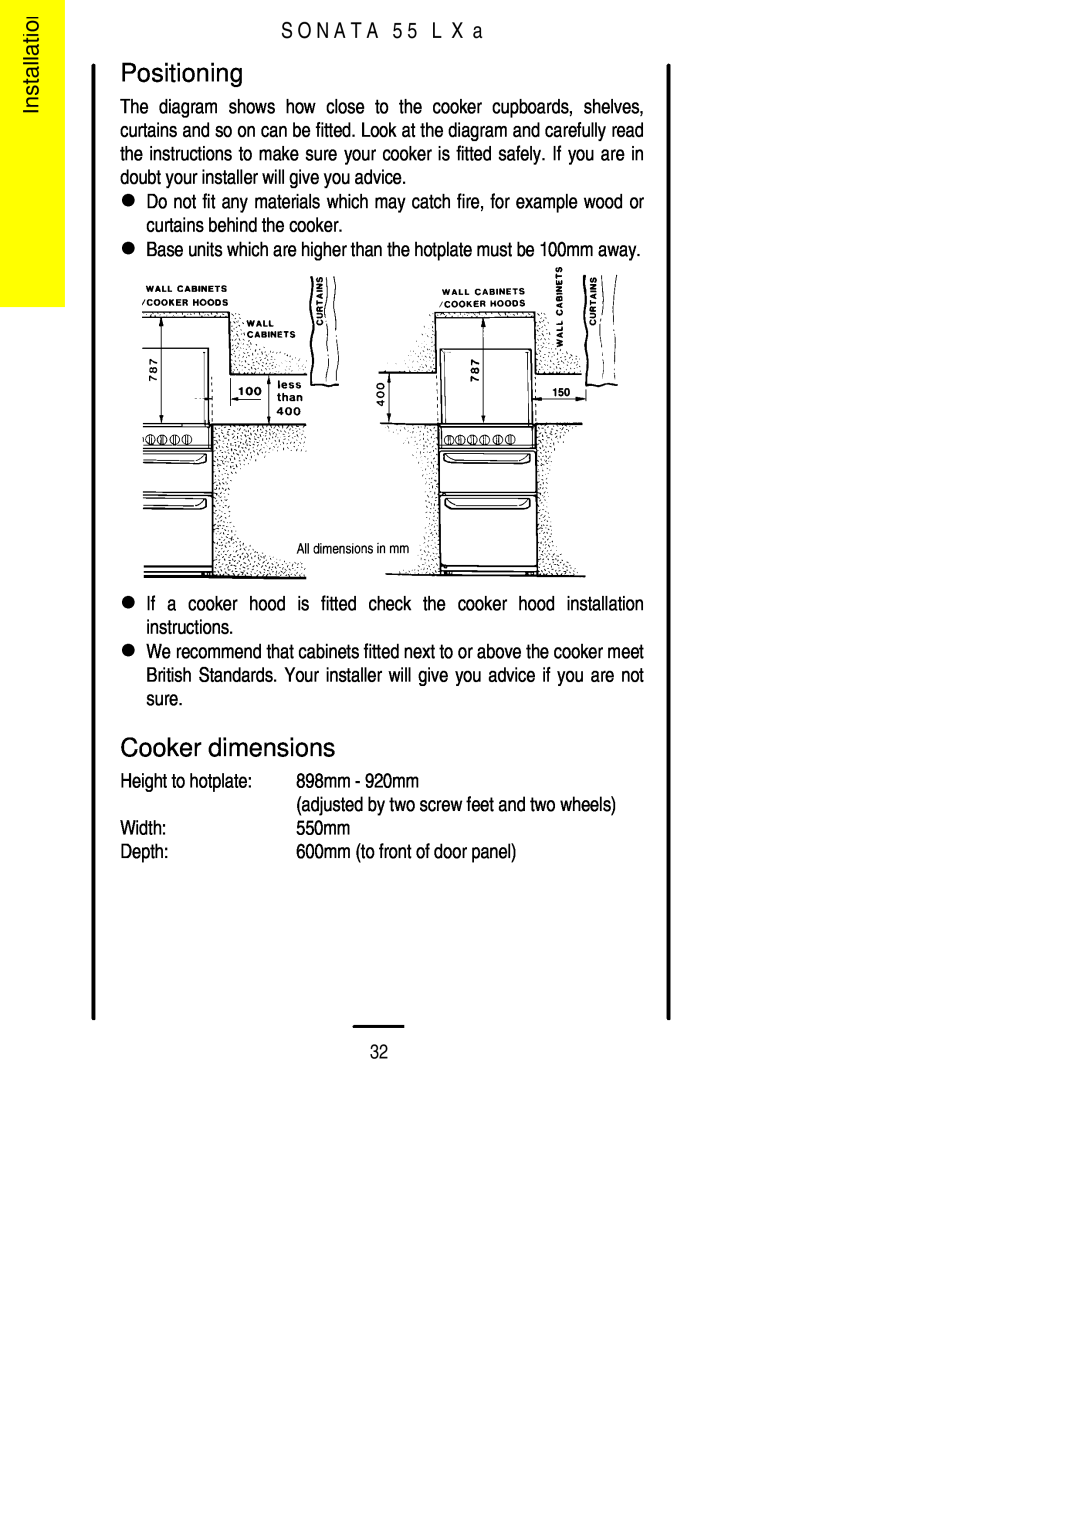 Electrolux 55LXa installation instructions Positioning, Cooker dimensions, Installation, S O N A T A 5 5 L X a 